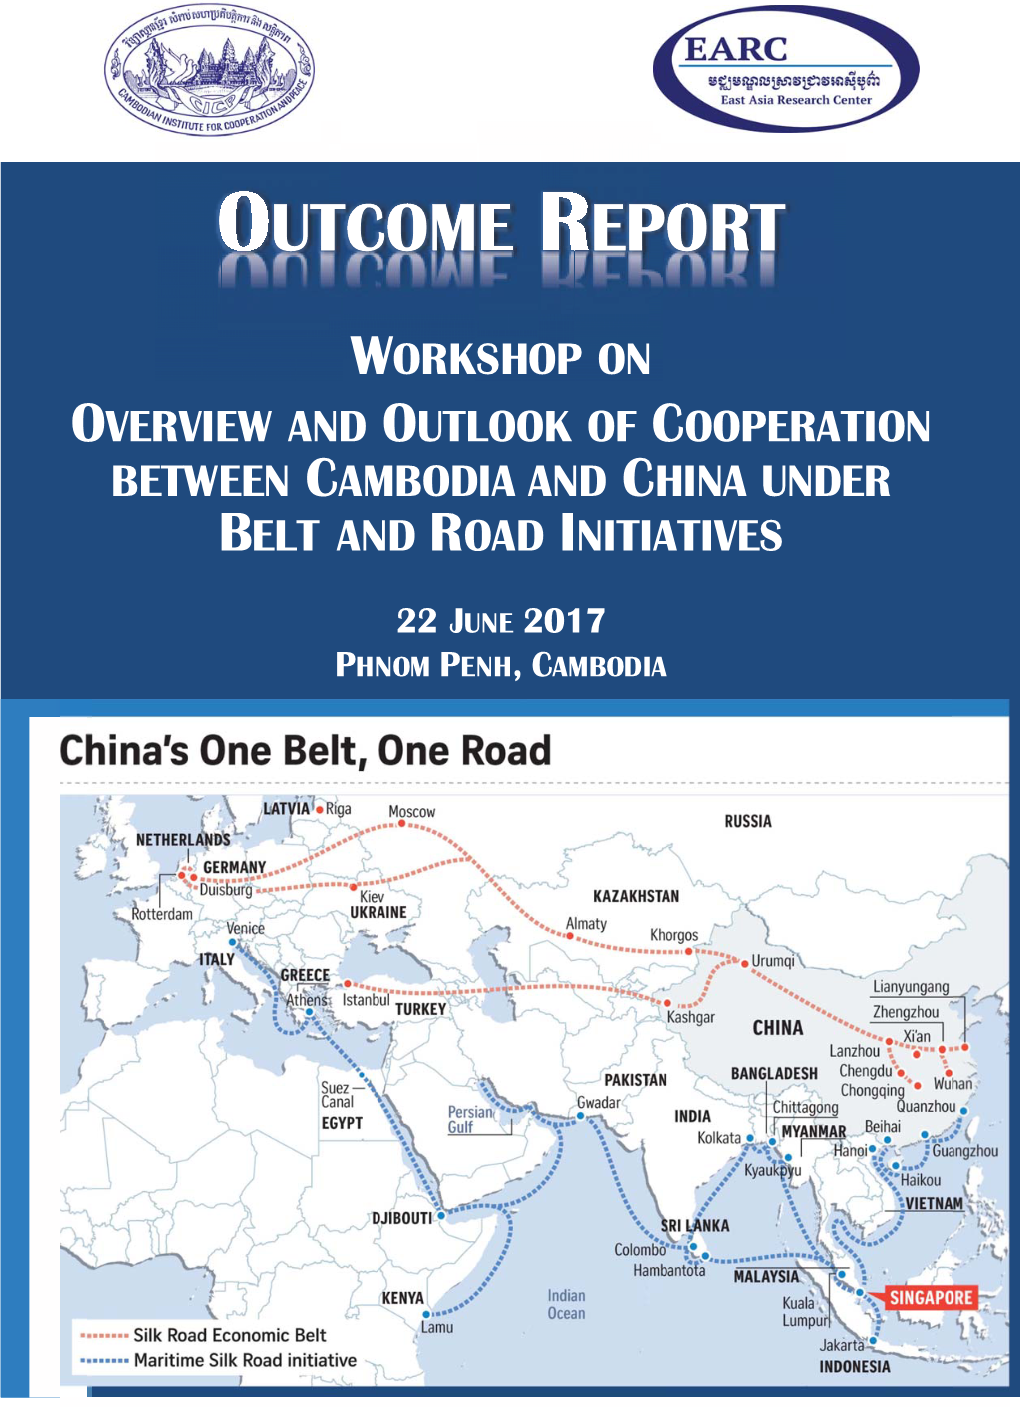 Overview and Outlook of Cooperation Between Cambodia and China Under Belt and Road Intiative